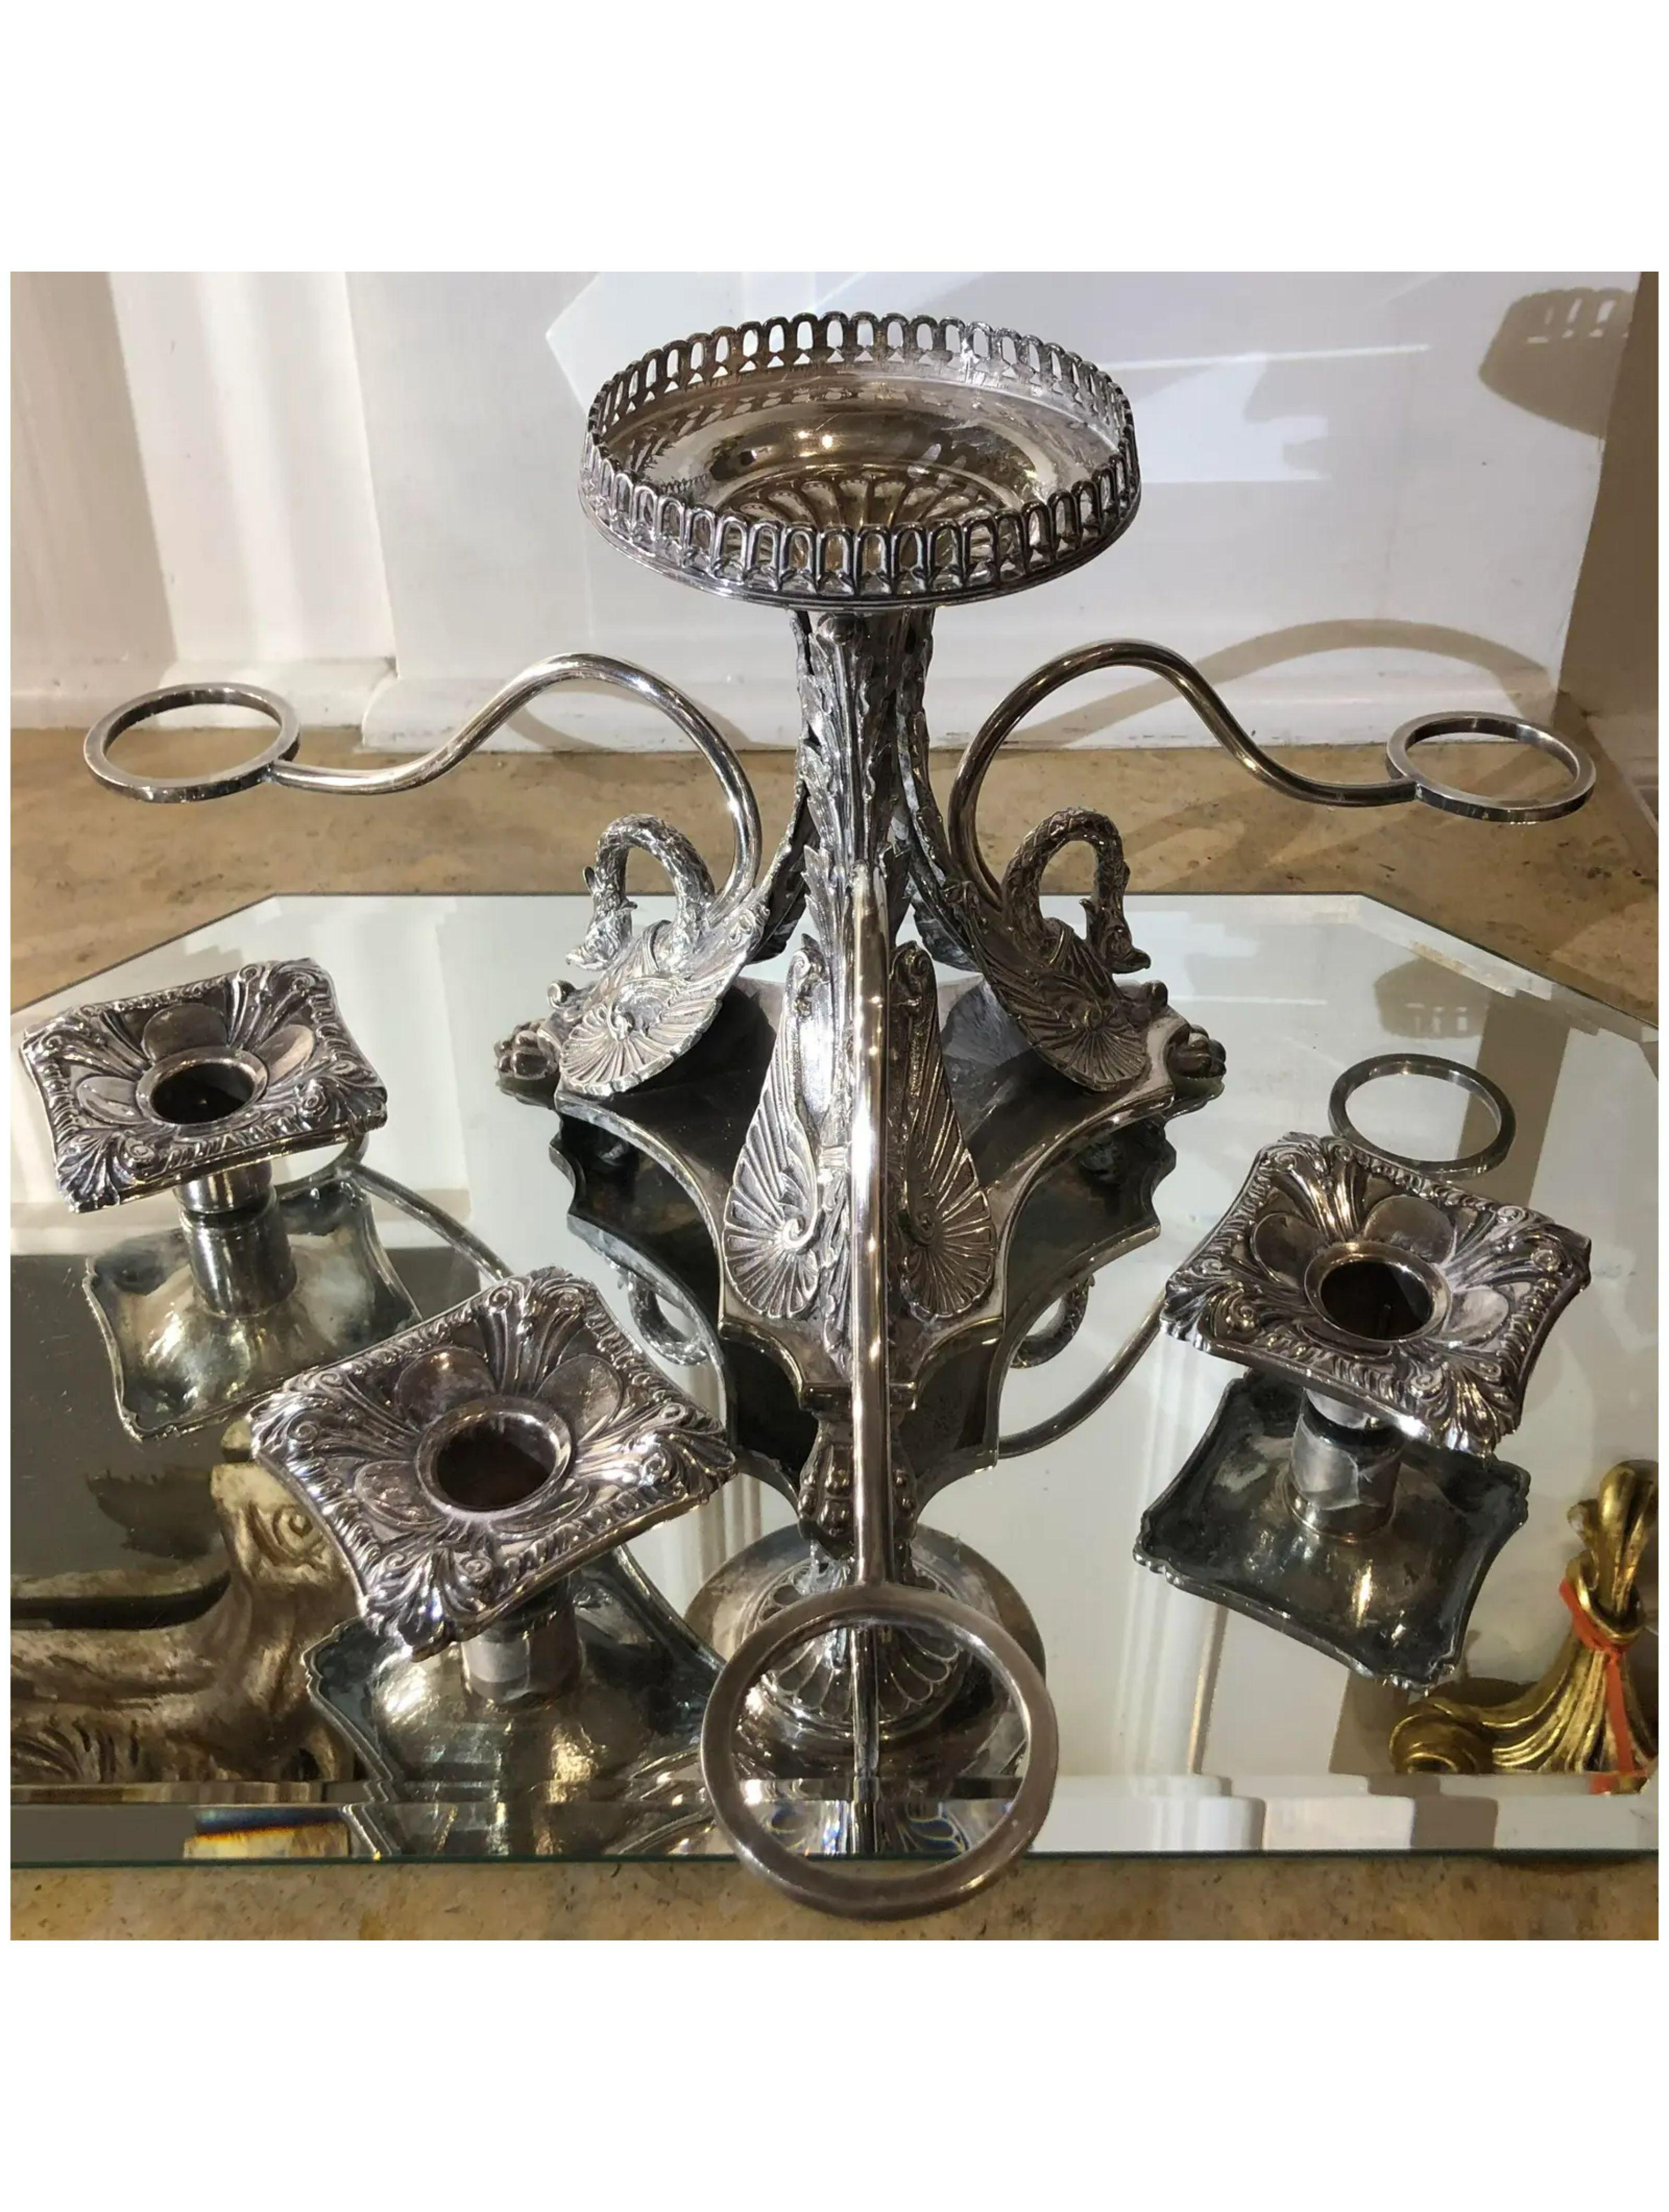 Regency Antique English Silver Plate & Crystal Centerpiece, Mid-19th Century